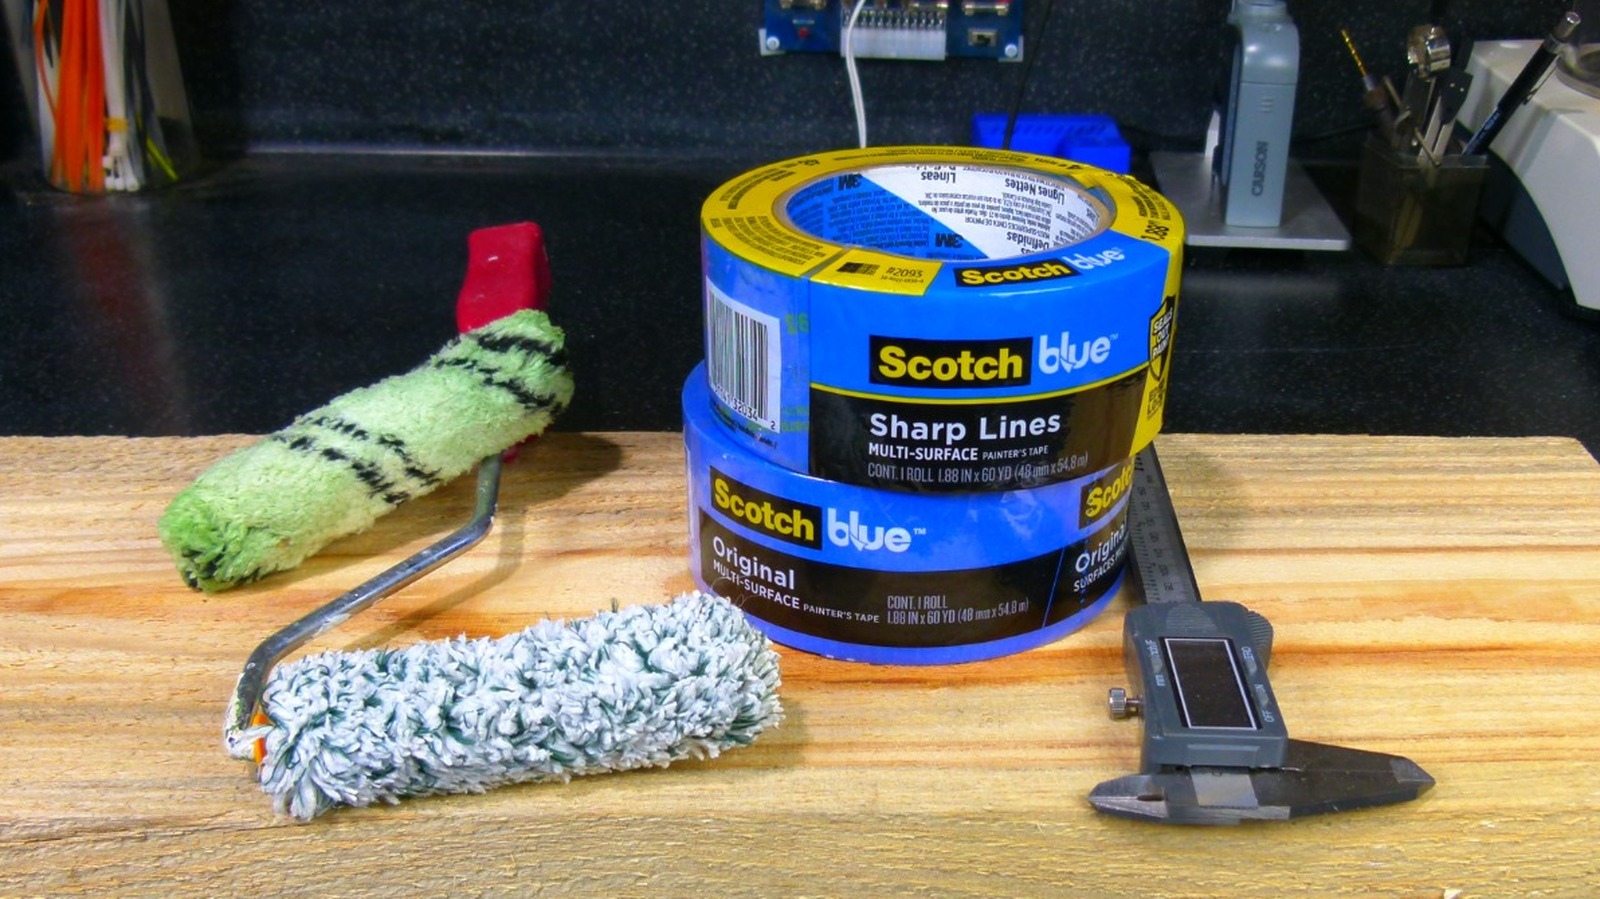 We Tried Home Depot's Cheapest And Priciest Painter's Tapes (You